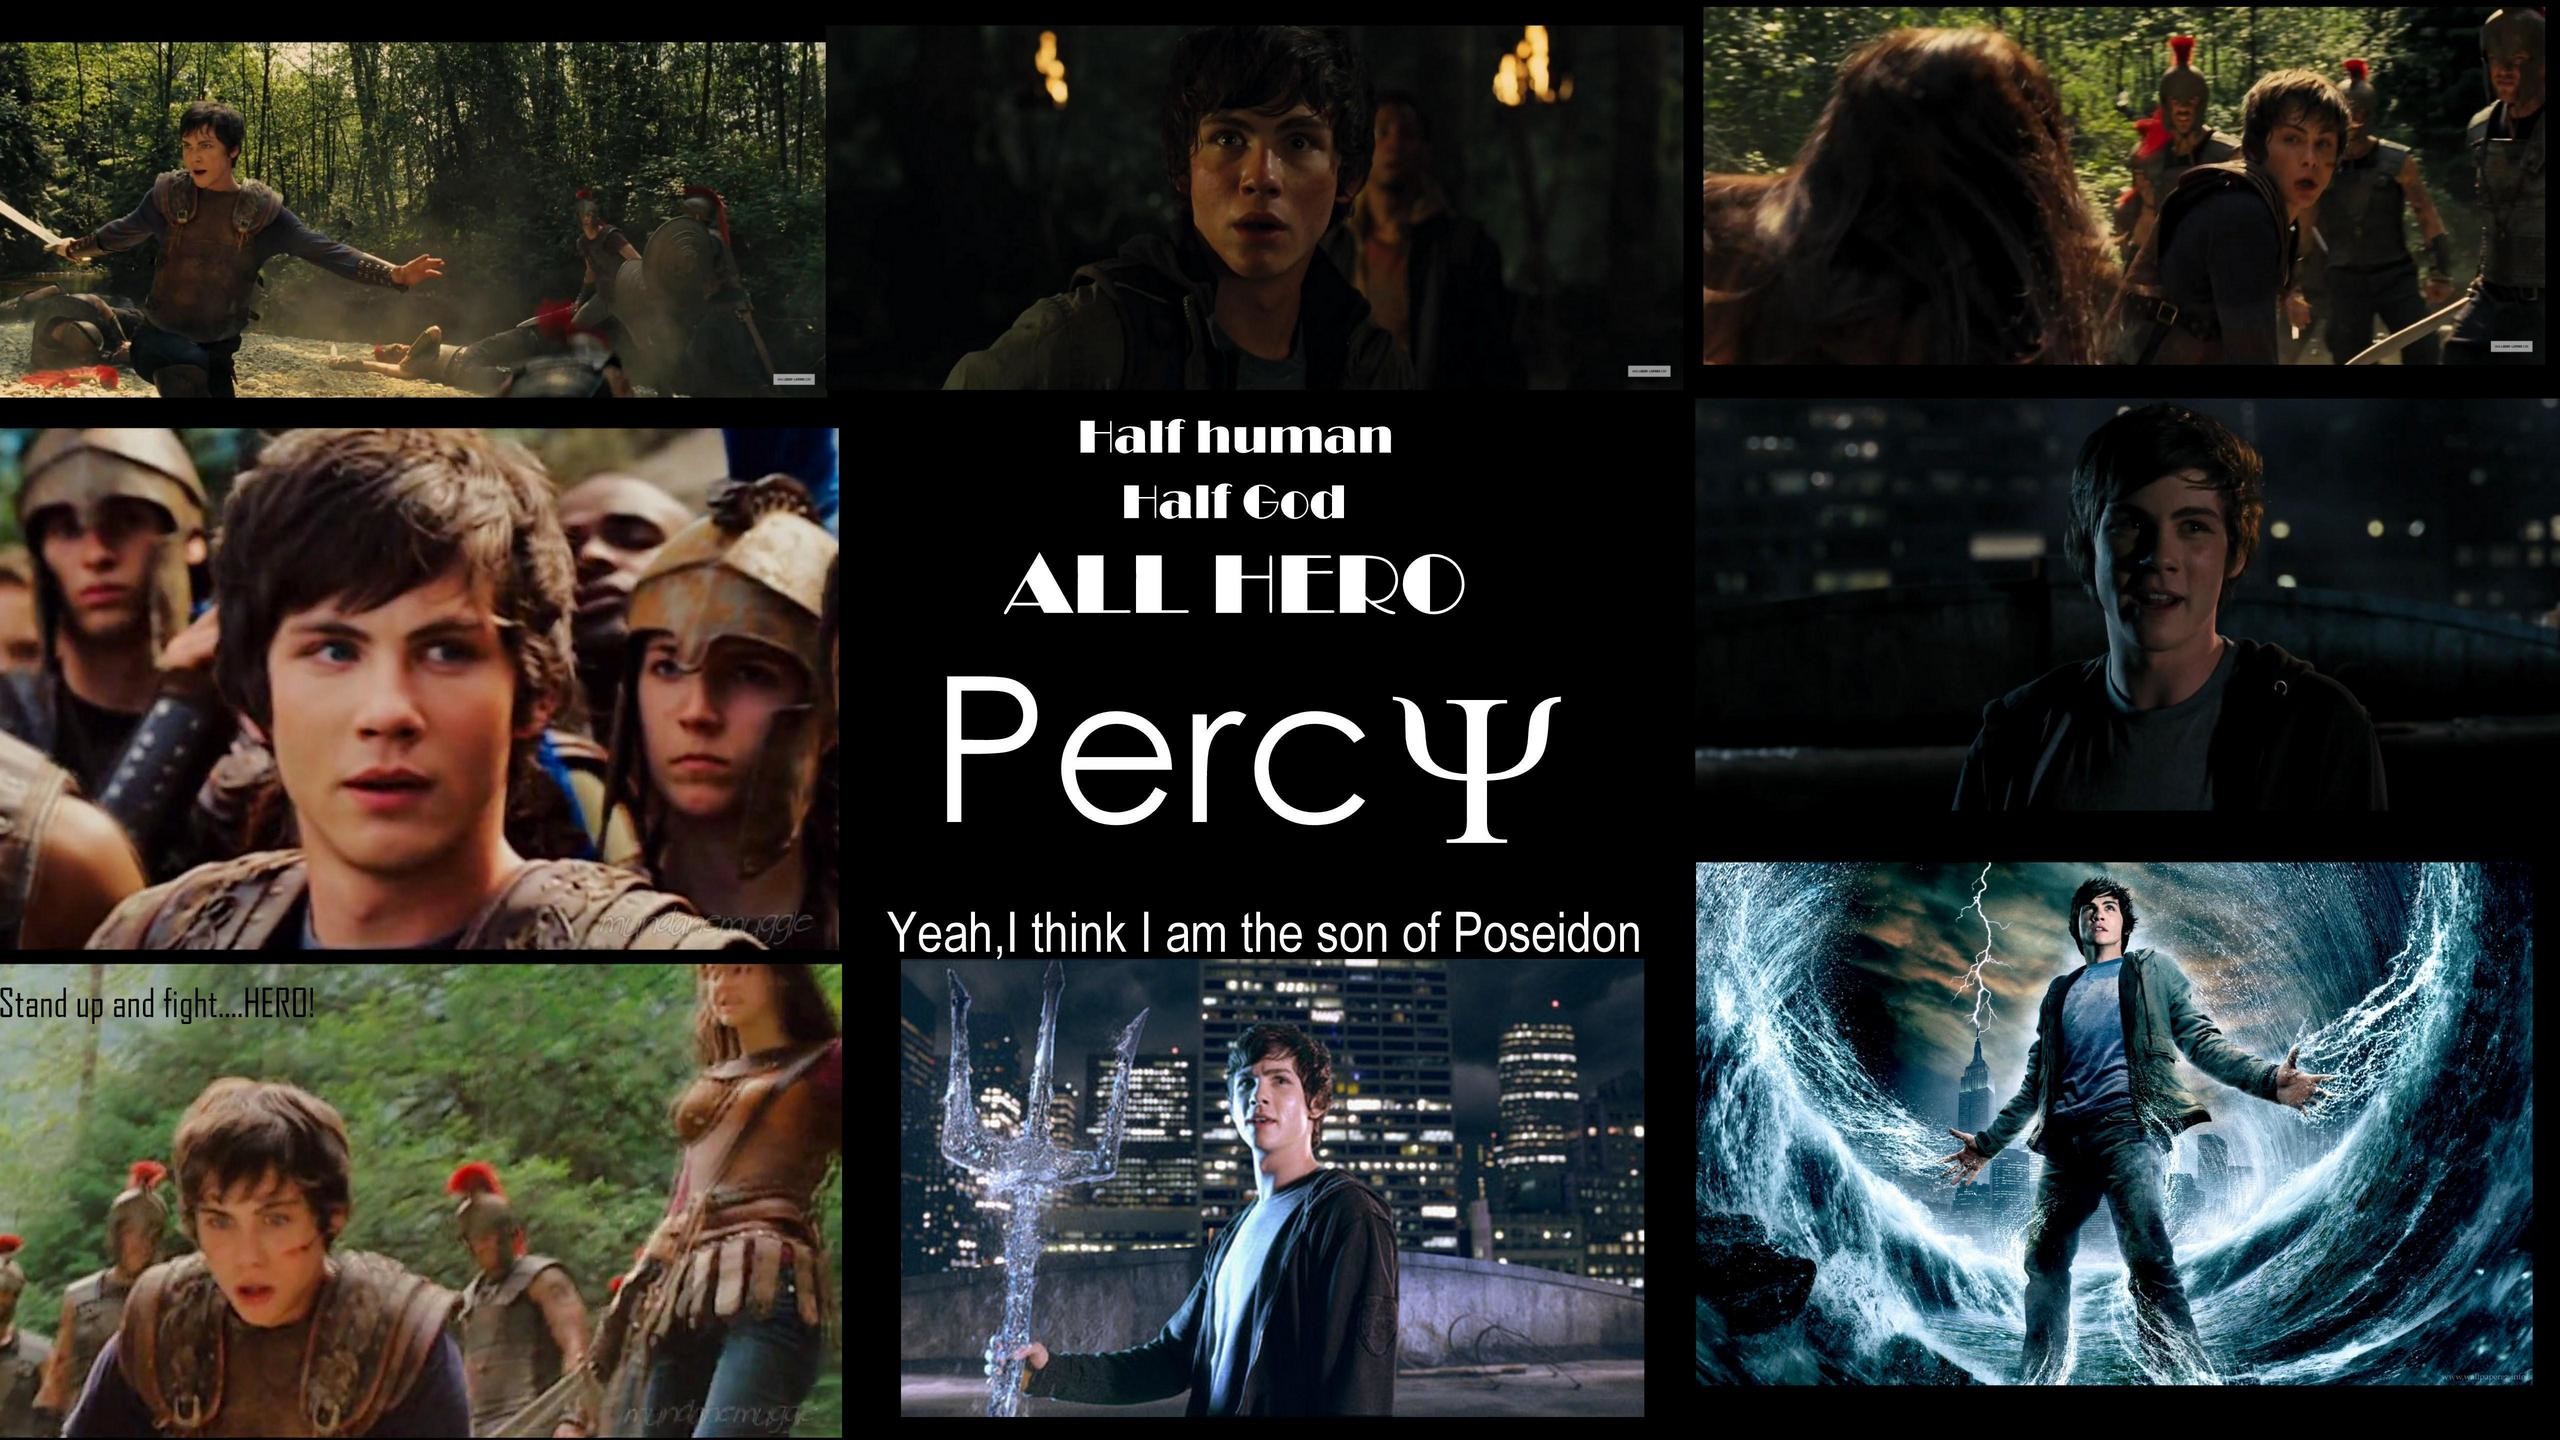 2560x1440 Percy Jackson & the Olympians movie images Percy HD wallpaper and  background photos